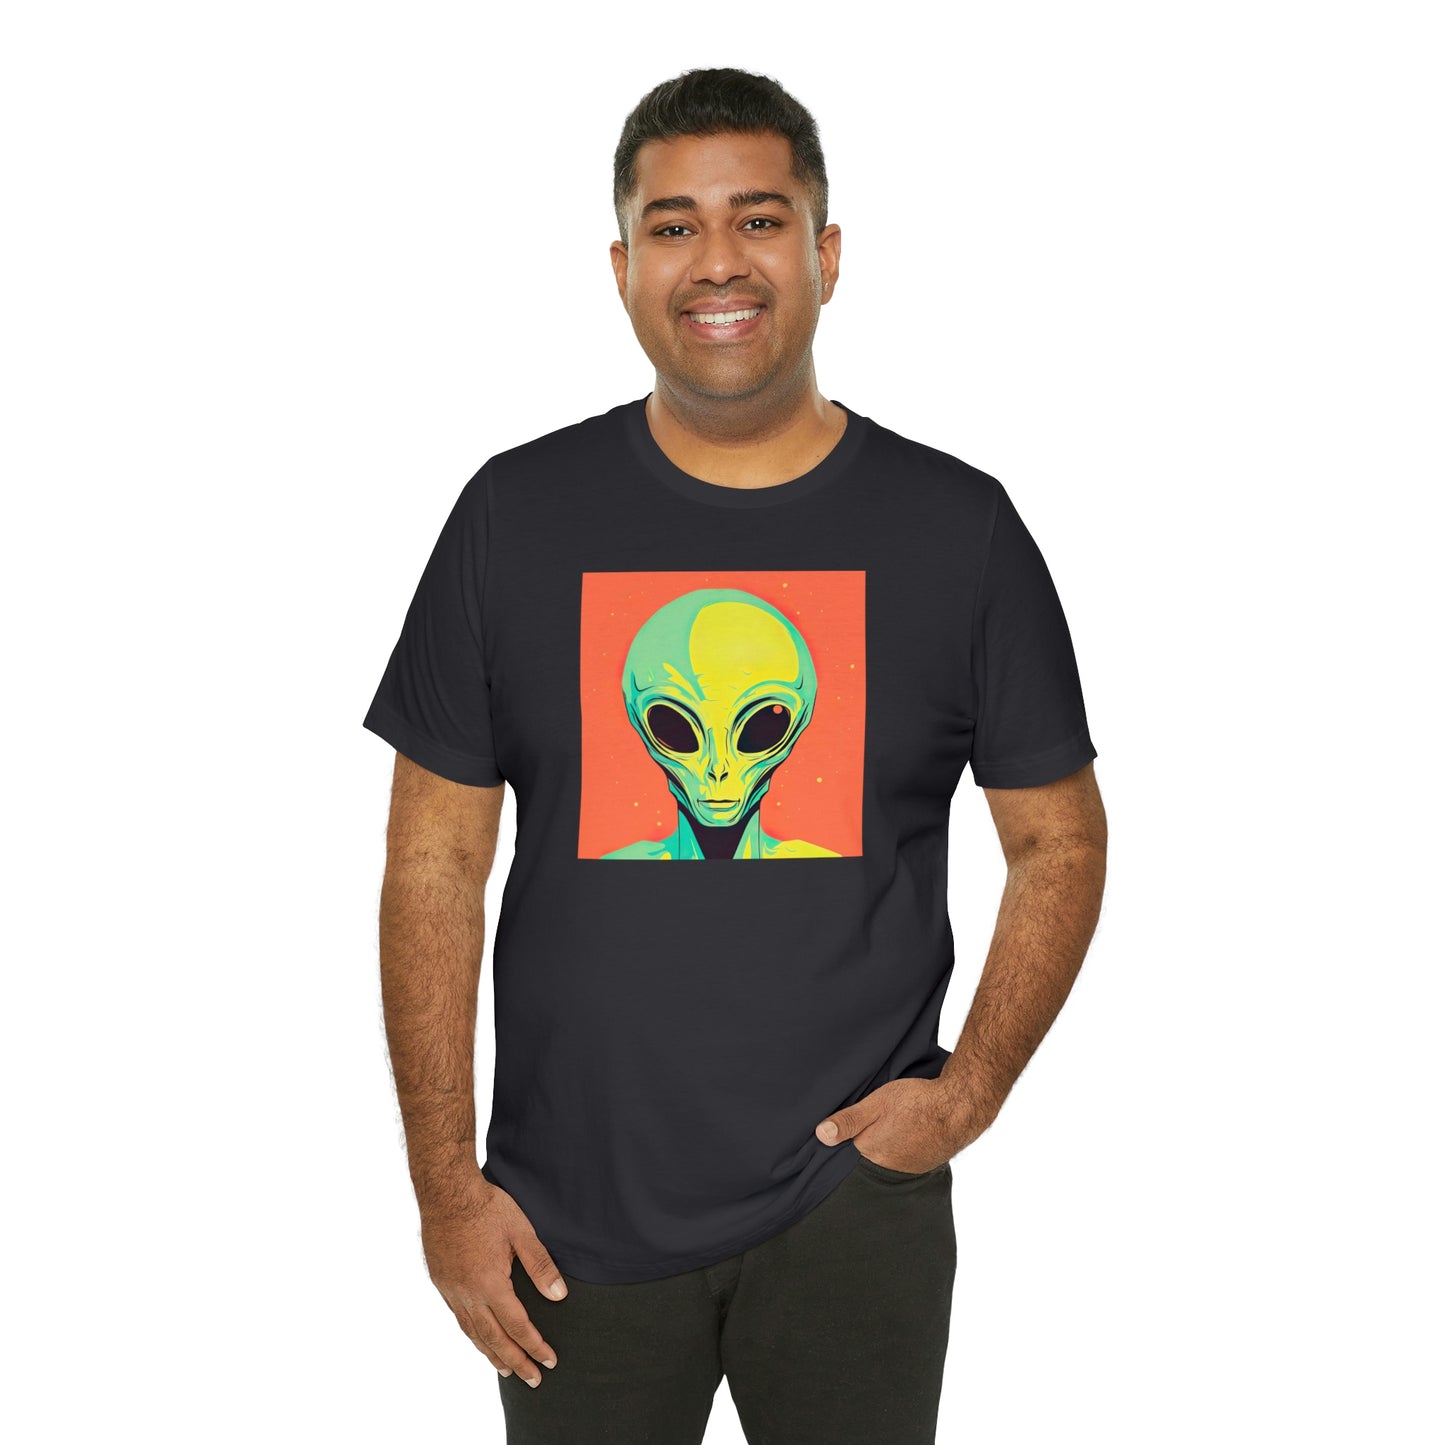 Neon Alien Selfie: Embrace the Edge of Two Worlds & Uncover Your Cosmic Identity